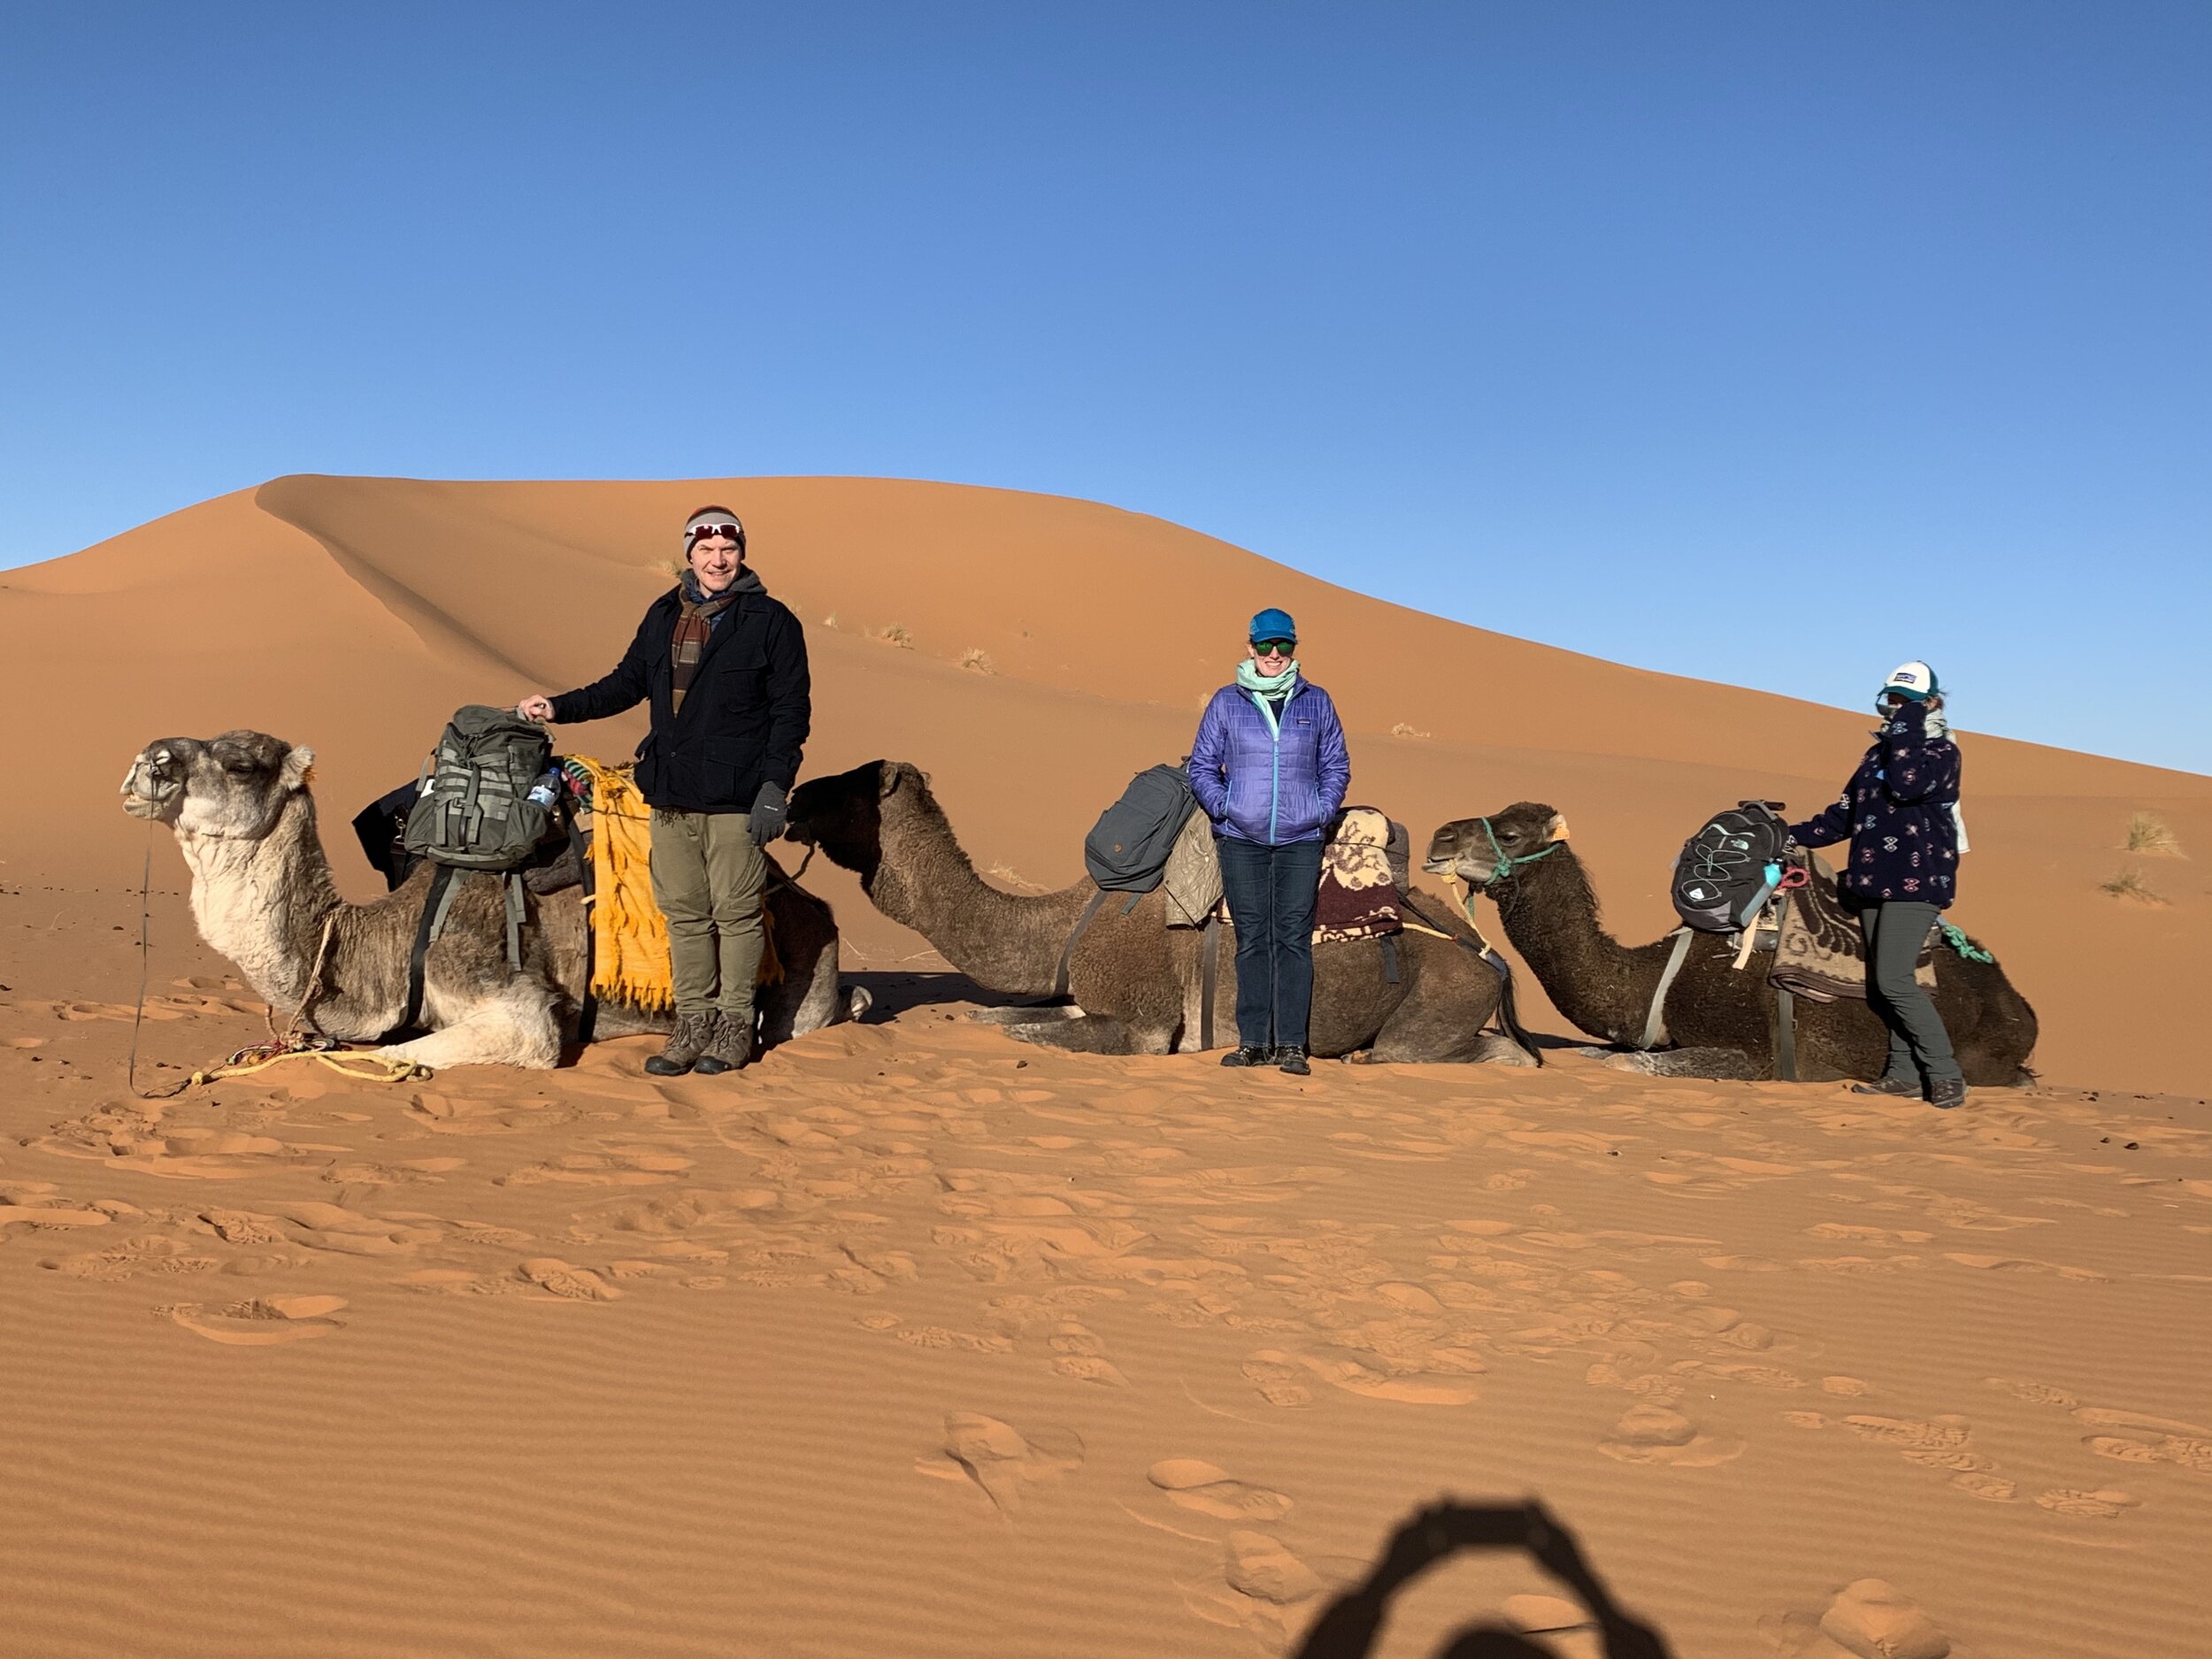 Portrait with camels #1.jpg